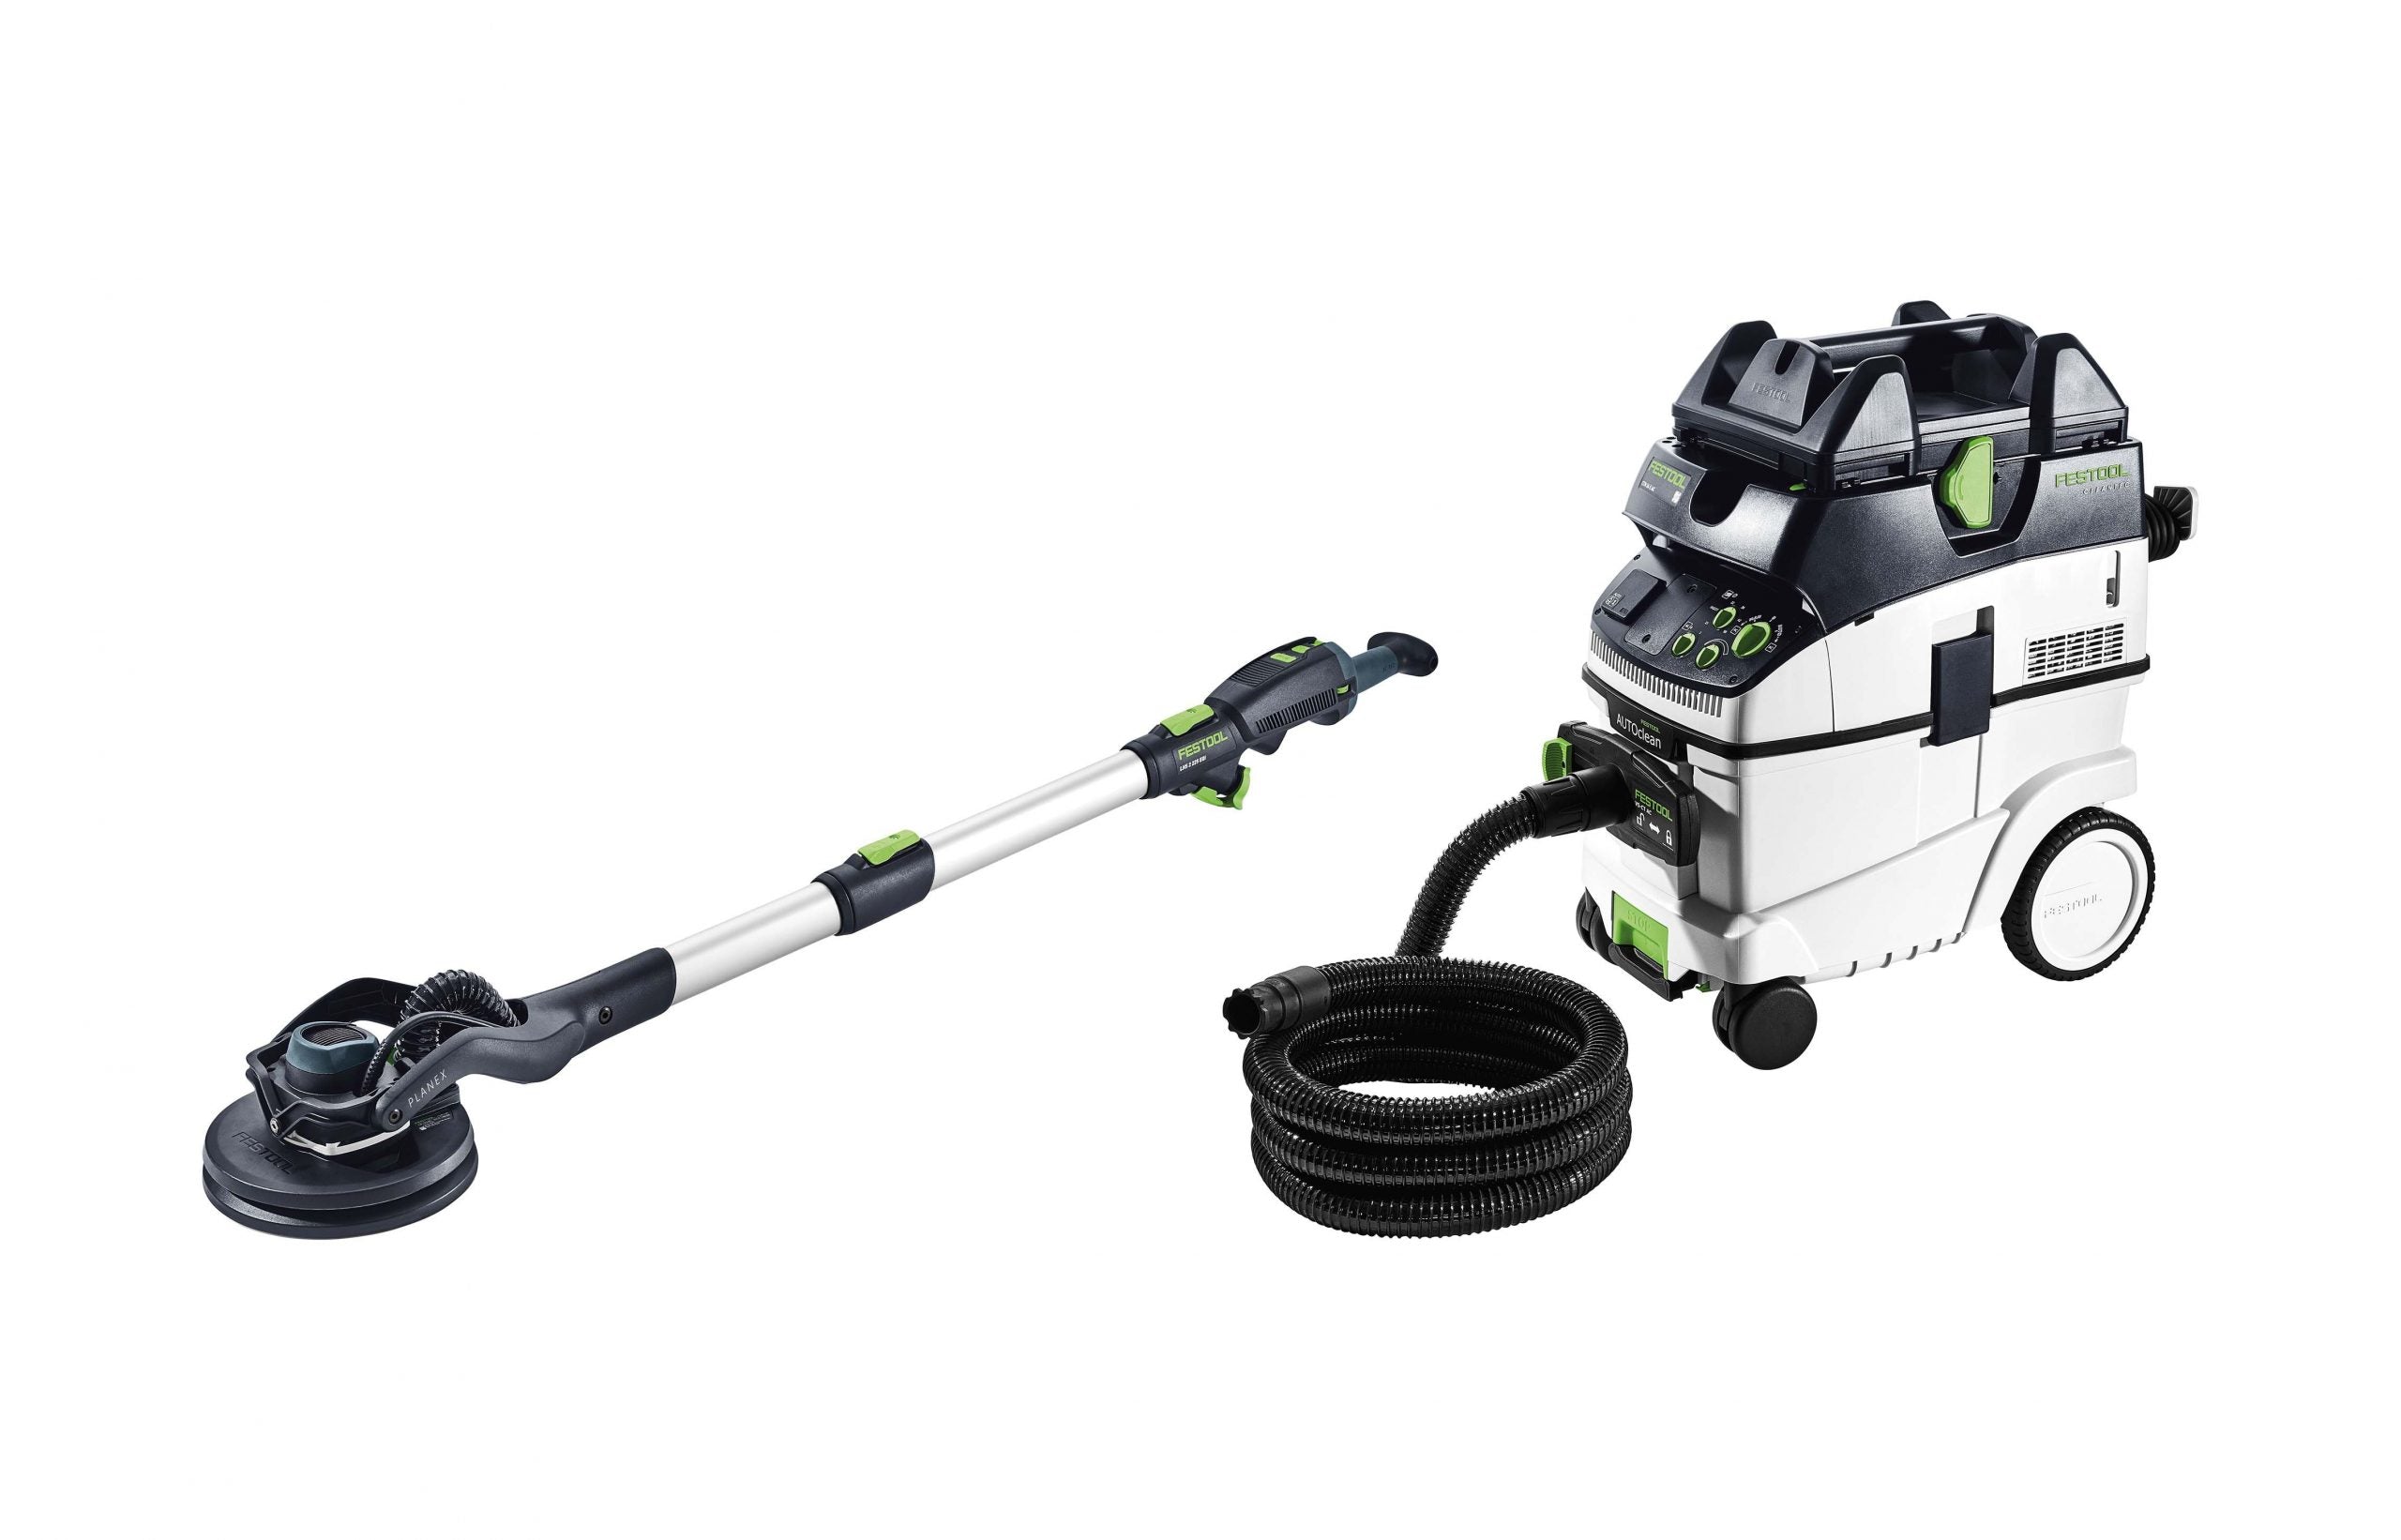 225mm Planex Drywall Long Reach Sander in Systainer with M Class Dust Extractor Set LHS 2 225 PLANEX 576702 By Festool